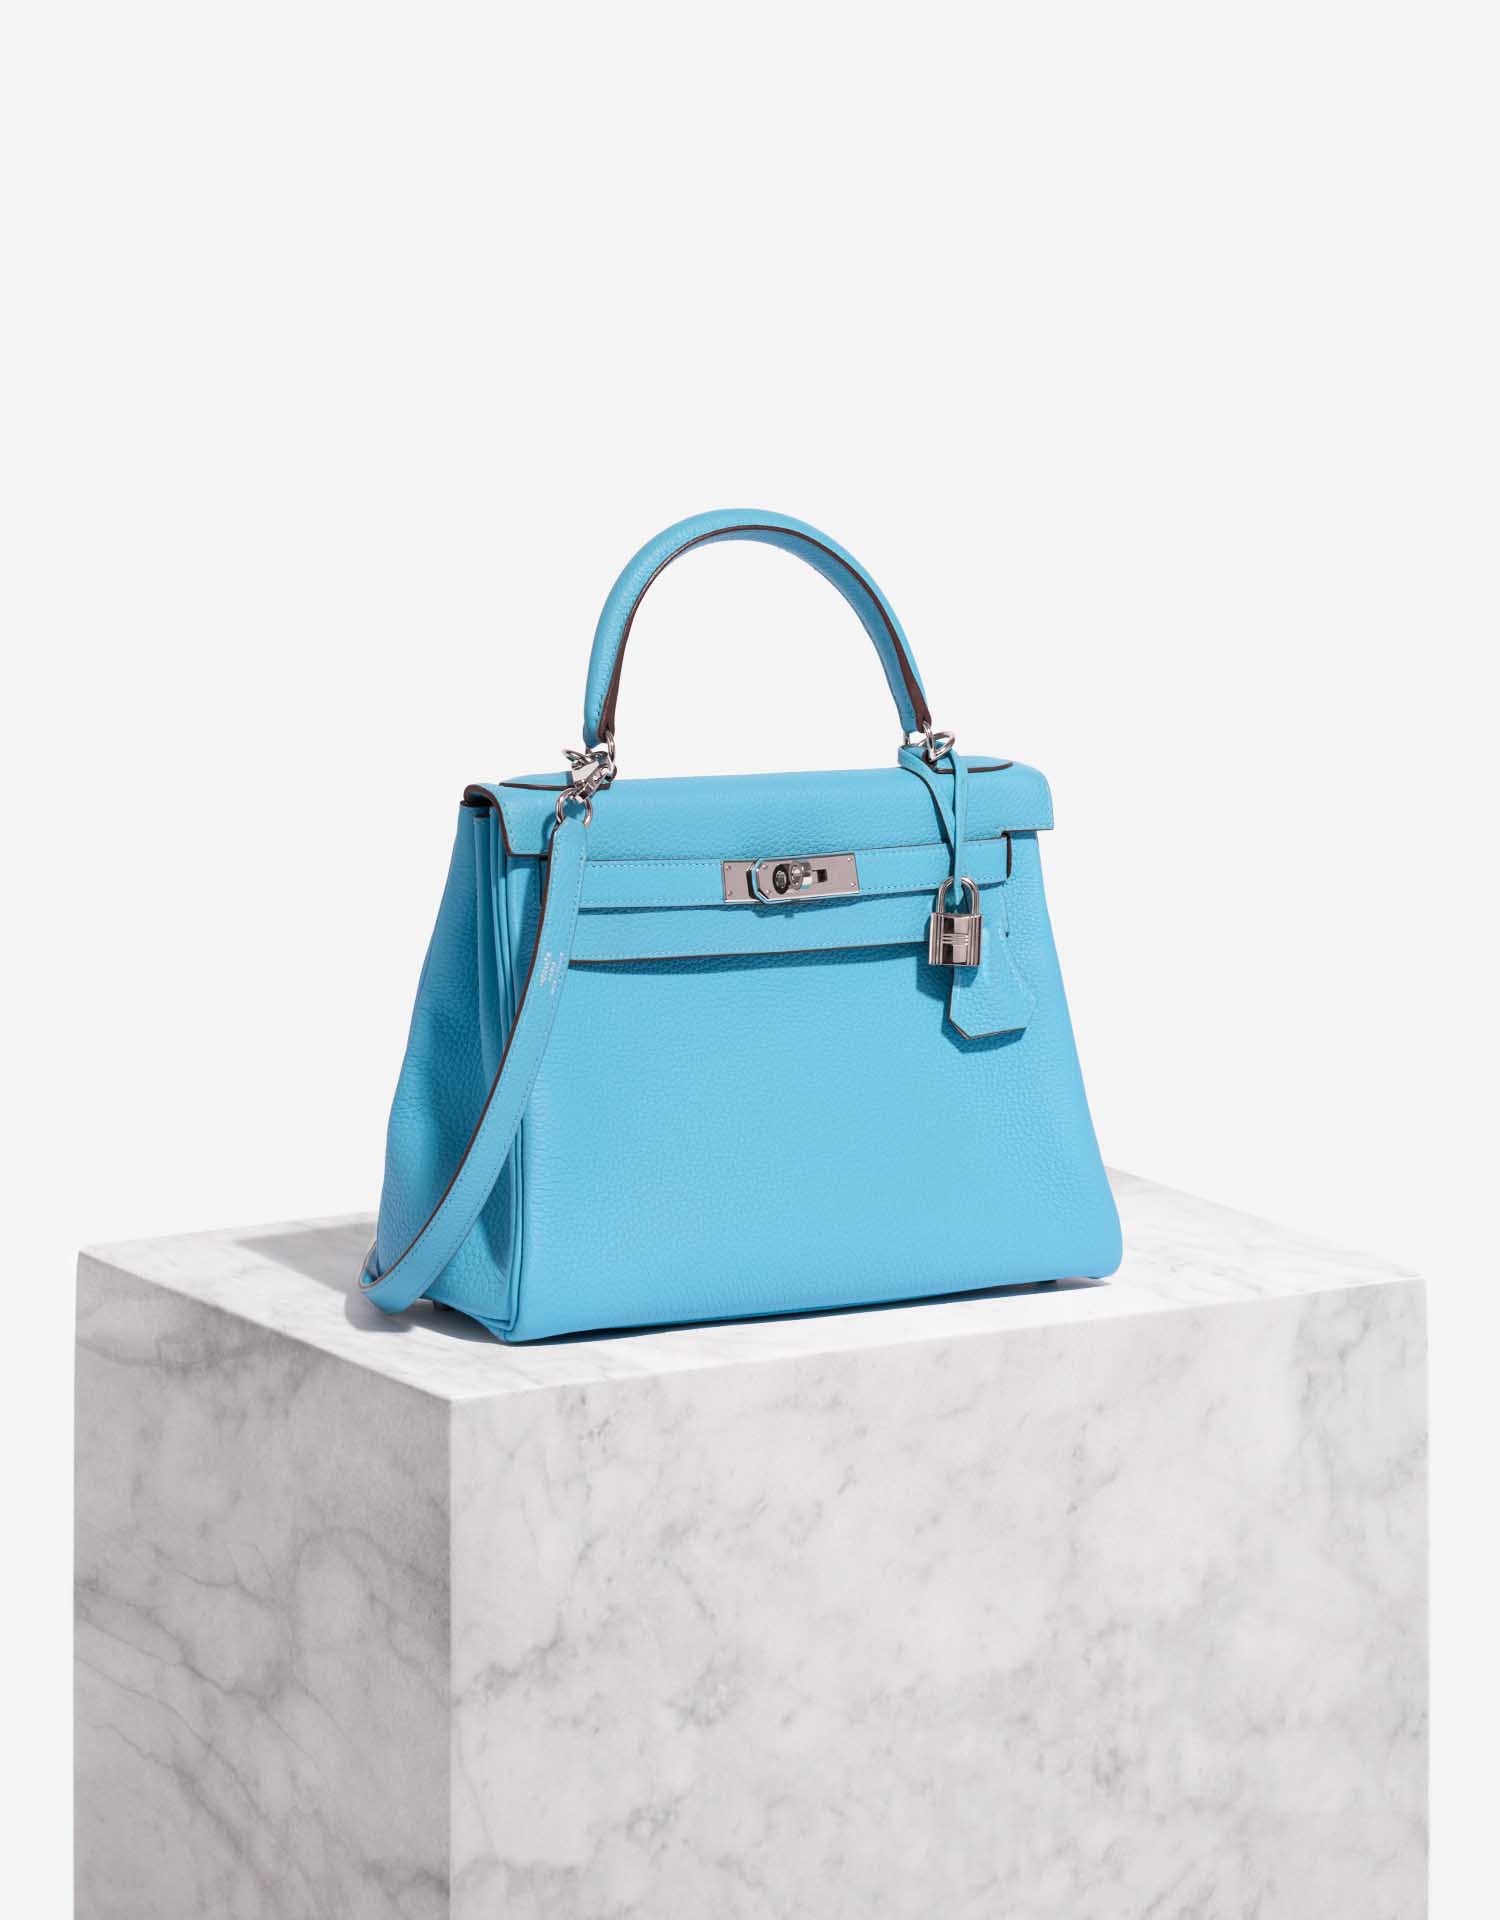 Hermes So Kelly 22 Togo Blue Colvert / Turquoise SHW Stamp T